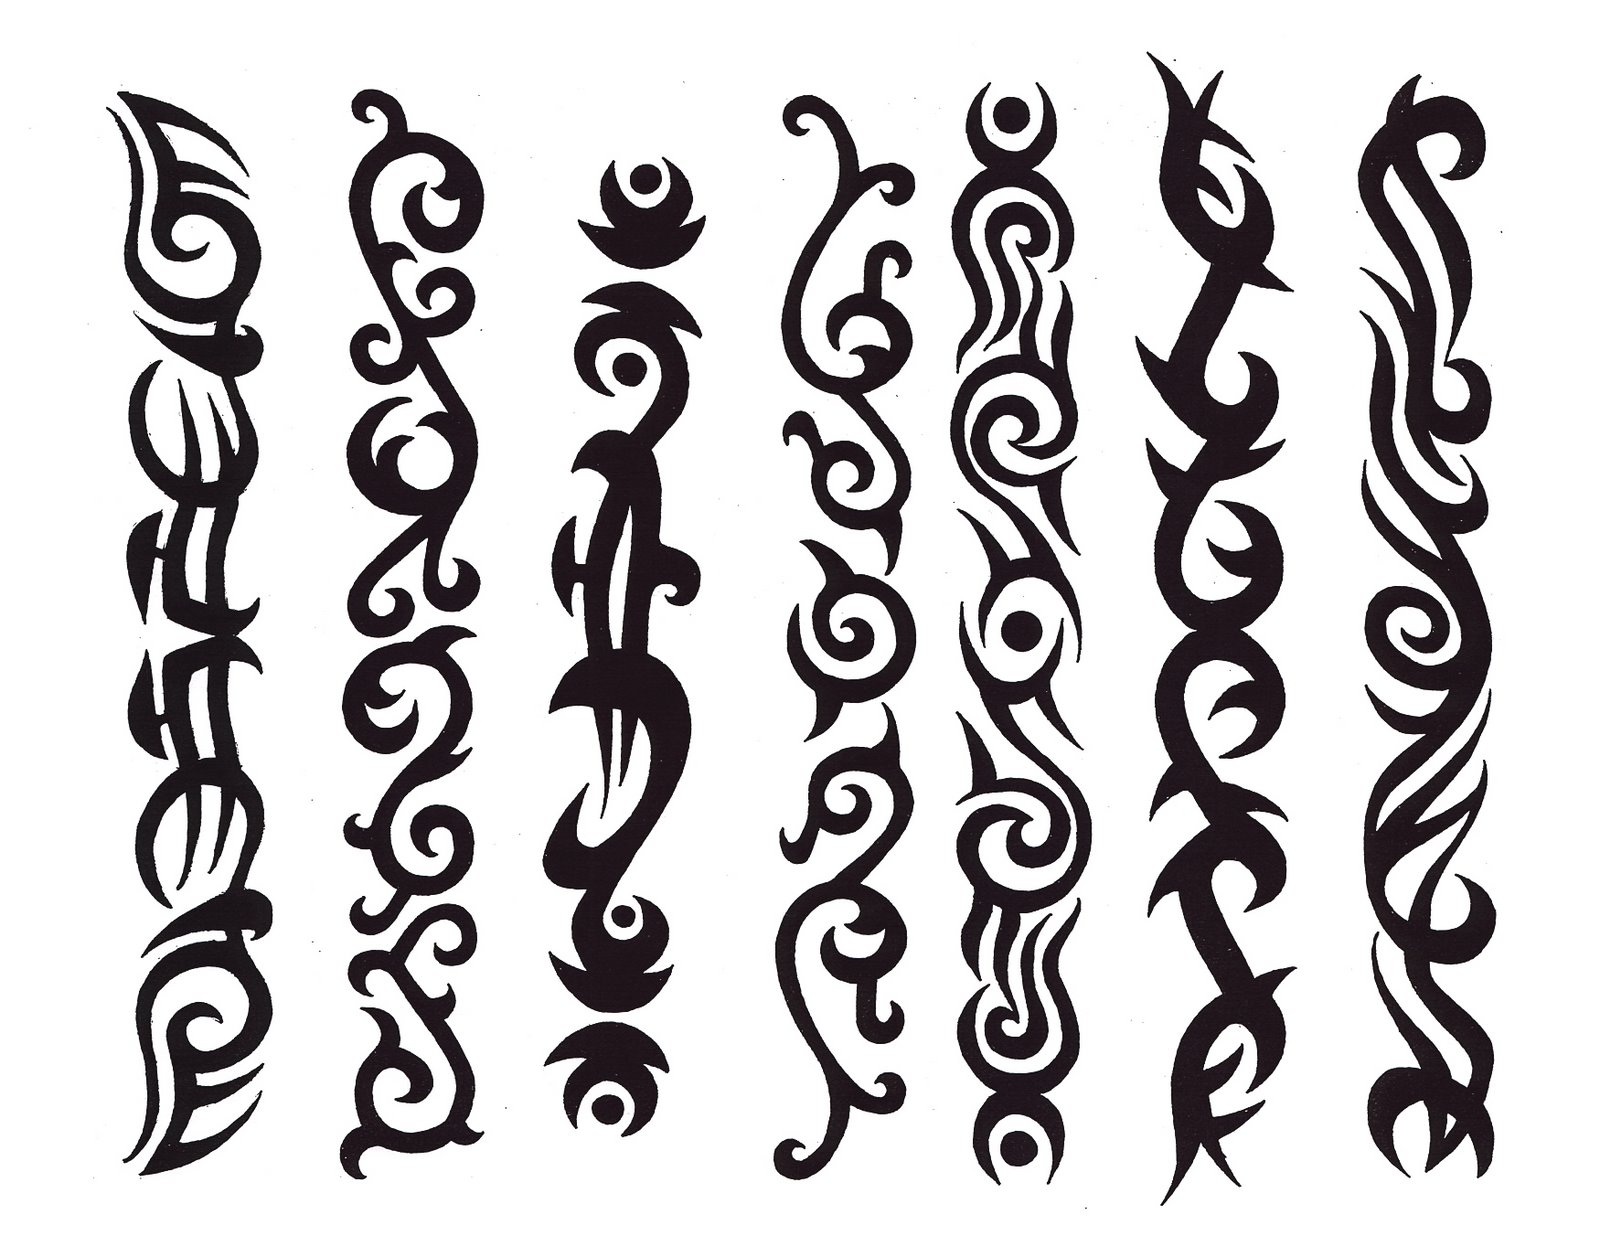 How To Choose A Henna Tattoo Design That Suits You Best | Seeking Alpha